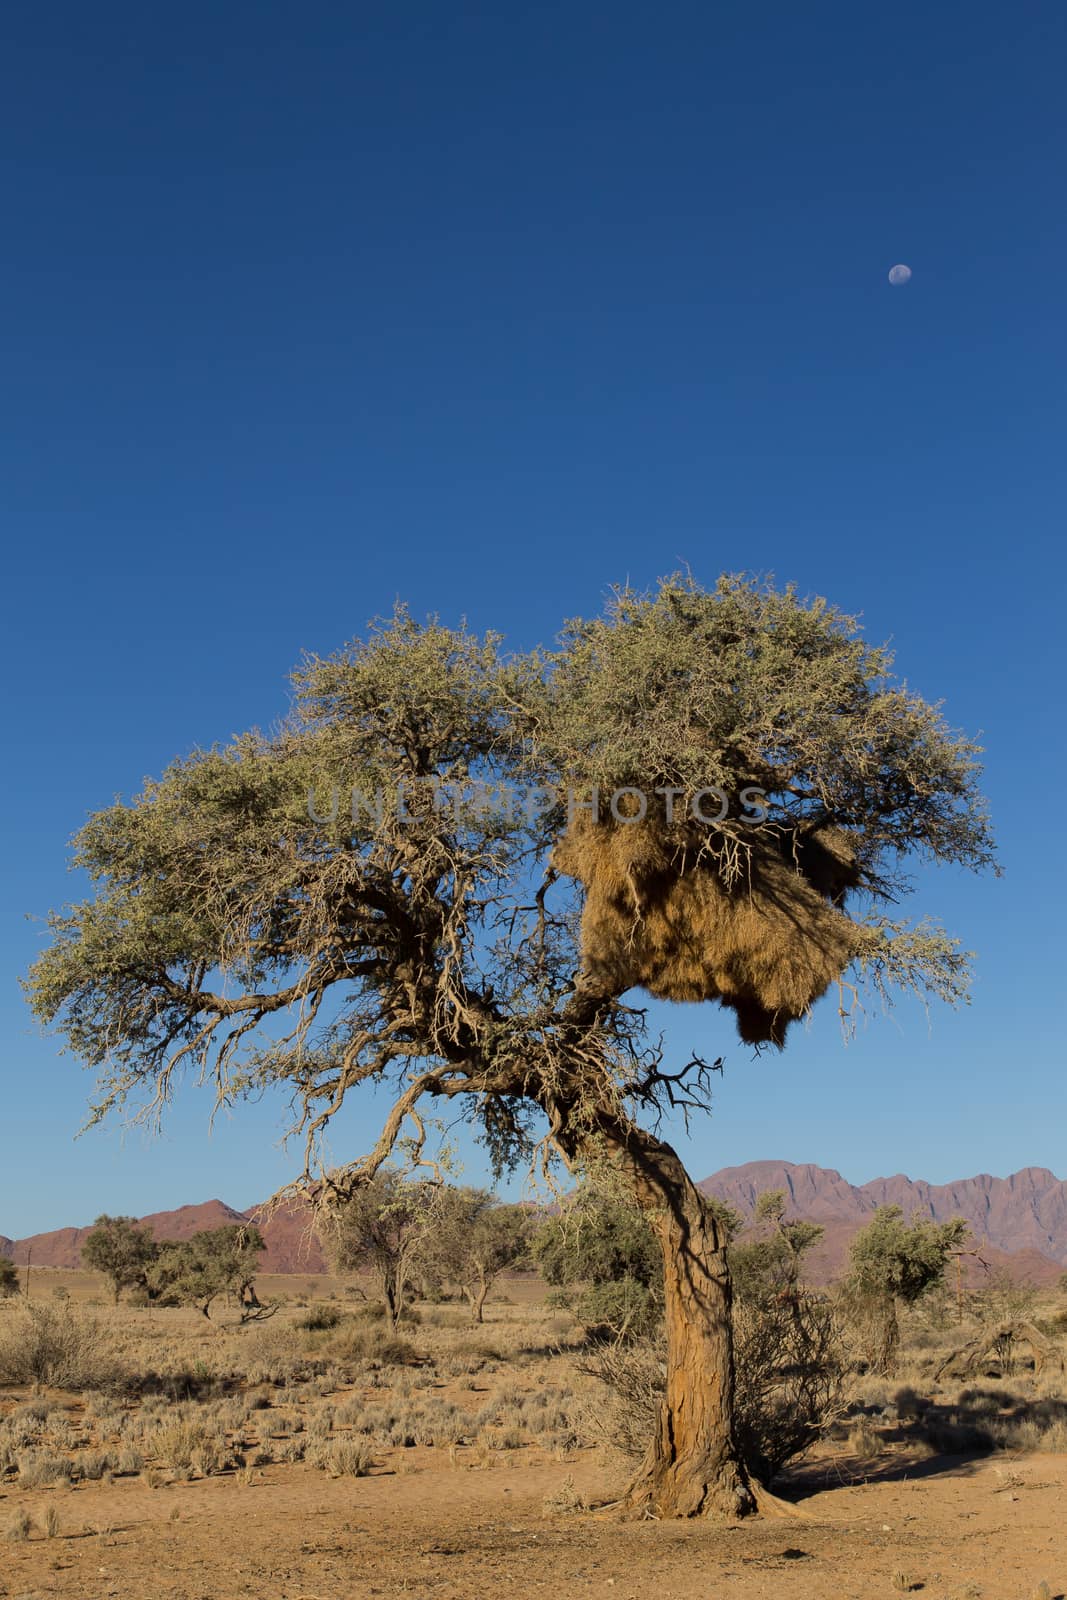 Big nest on a tree from Namibia